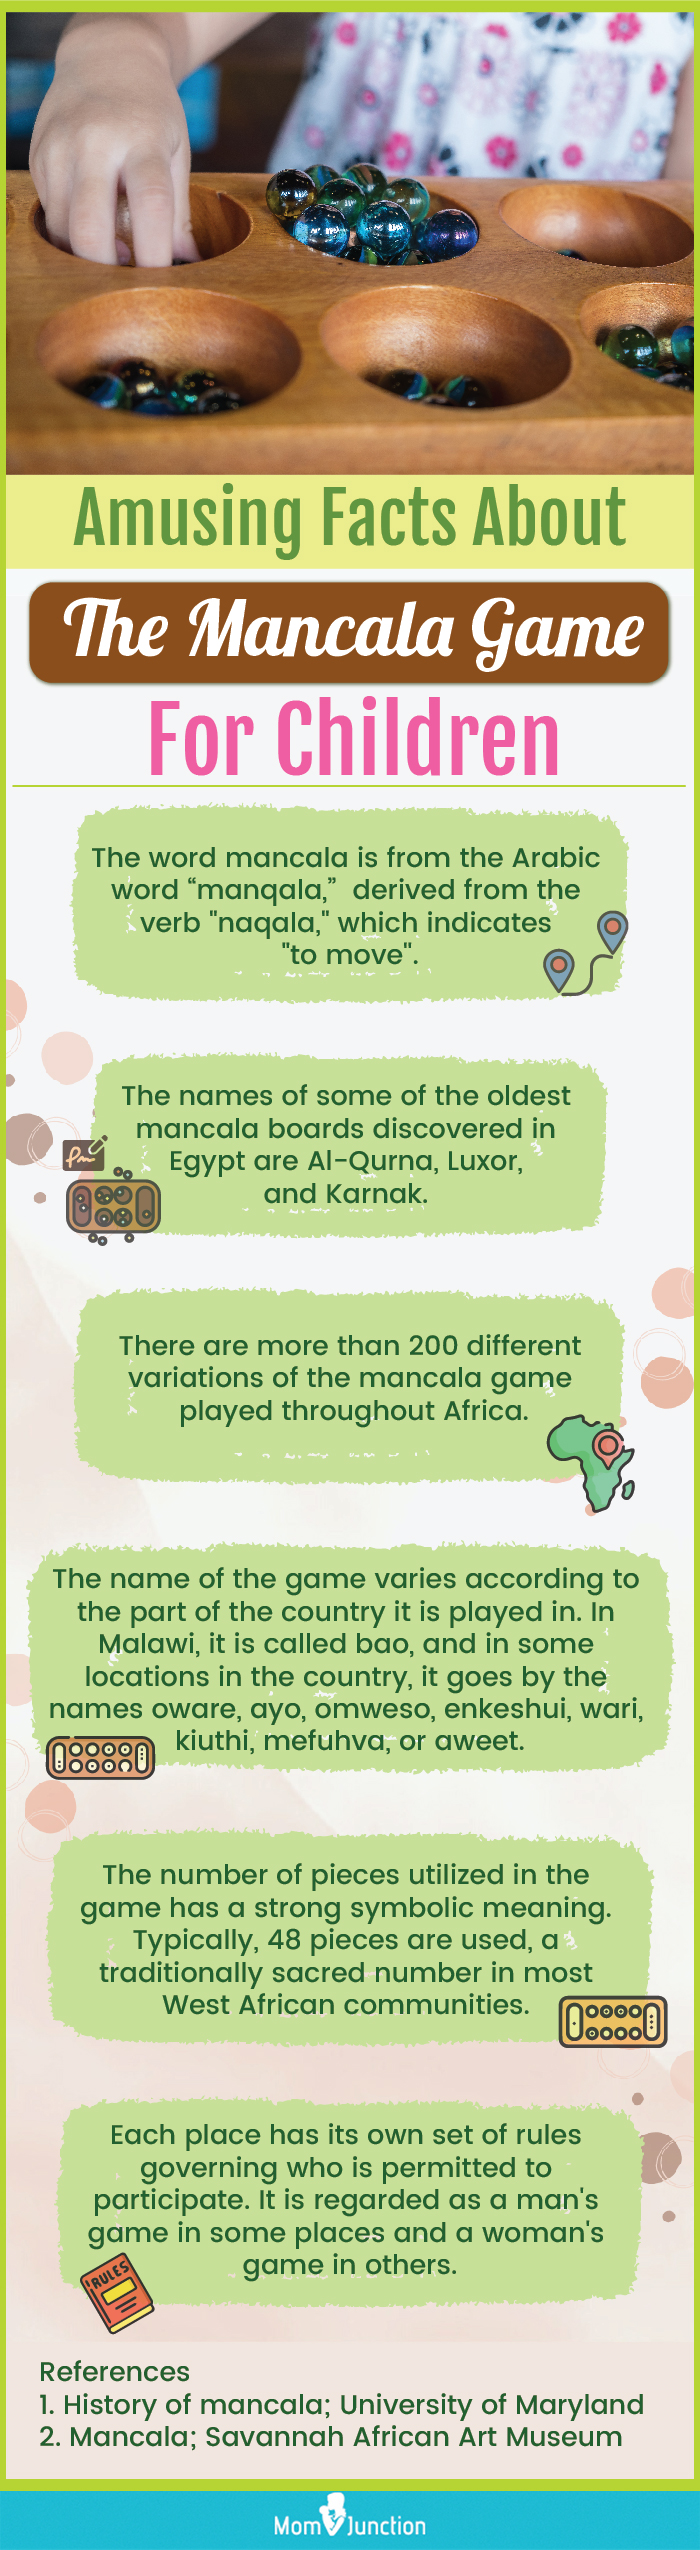 facts about the mancala game (infographic)